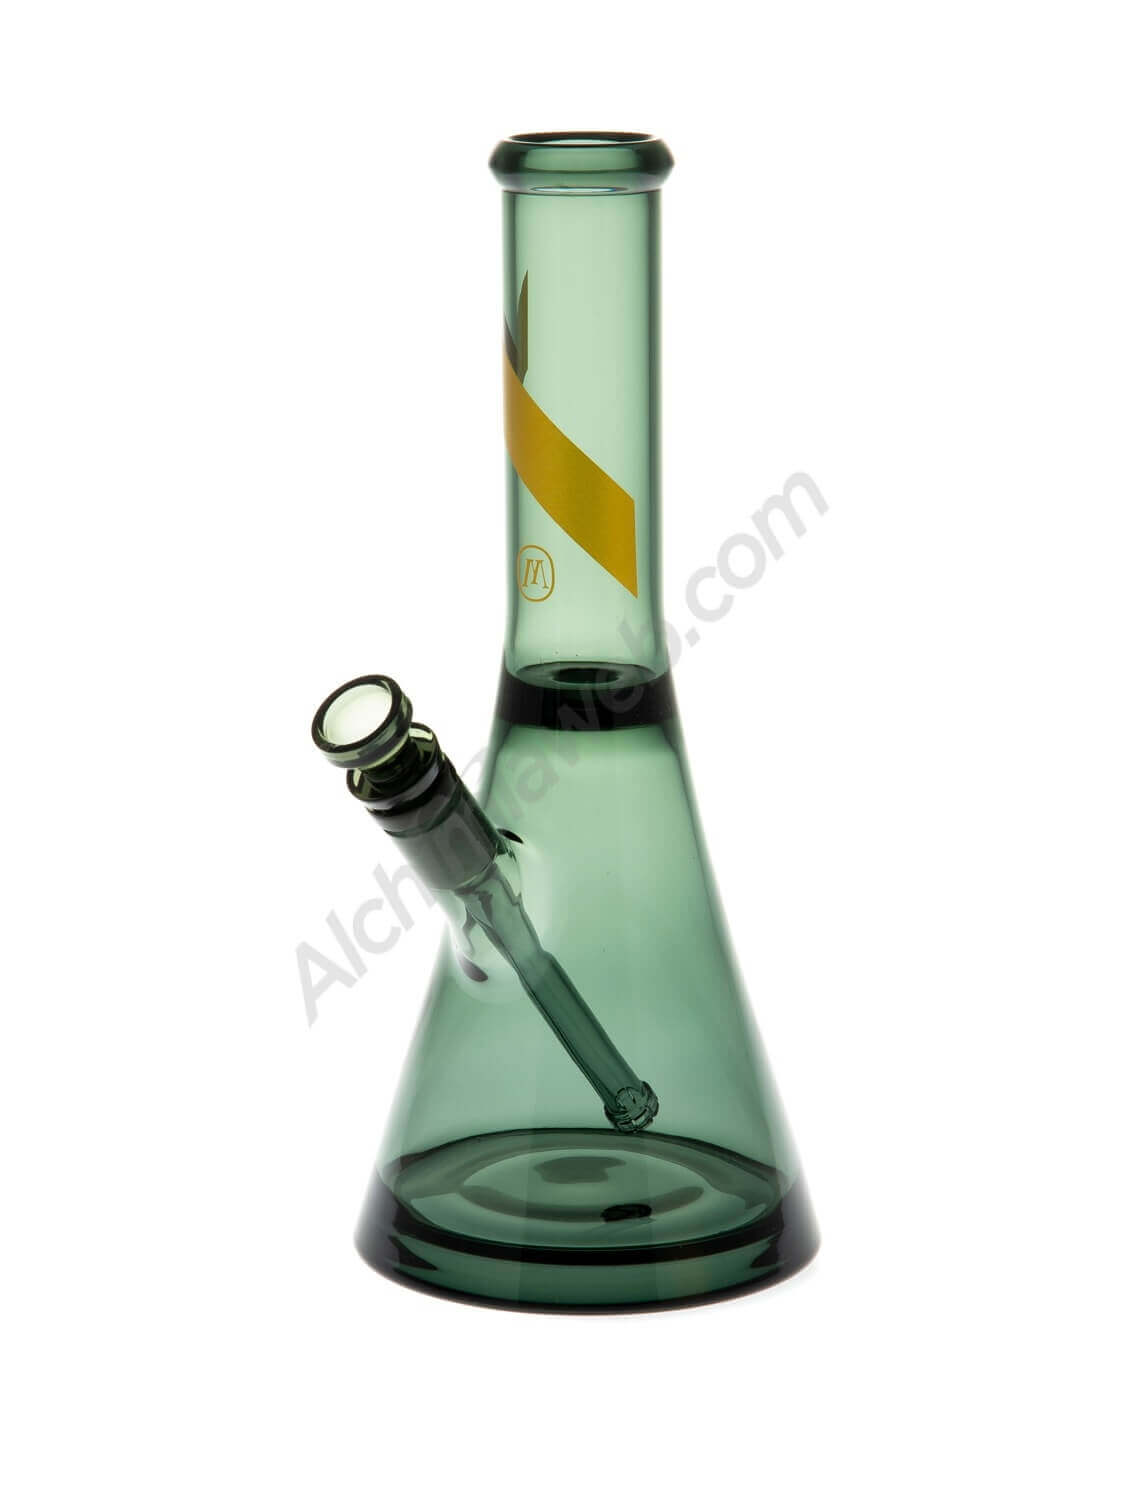 Sale of Smoked glass pipe 31cm Marley